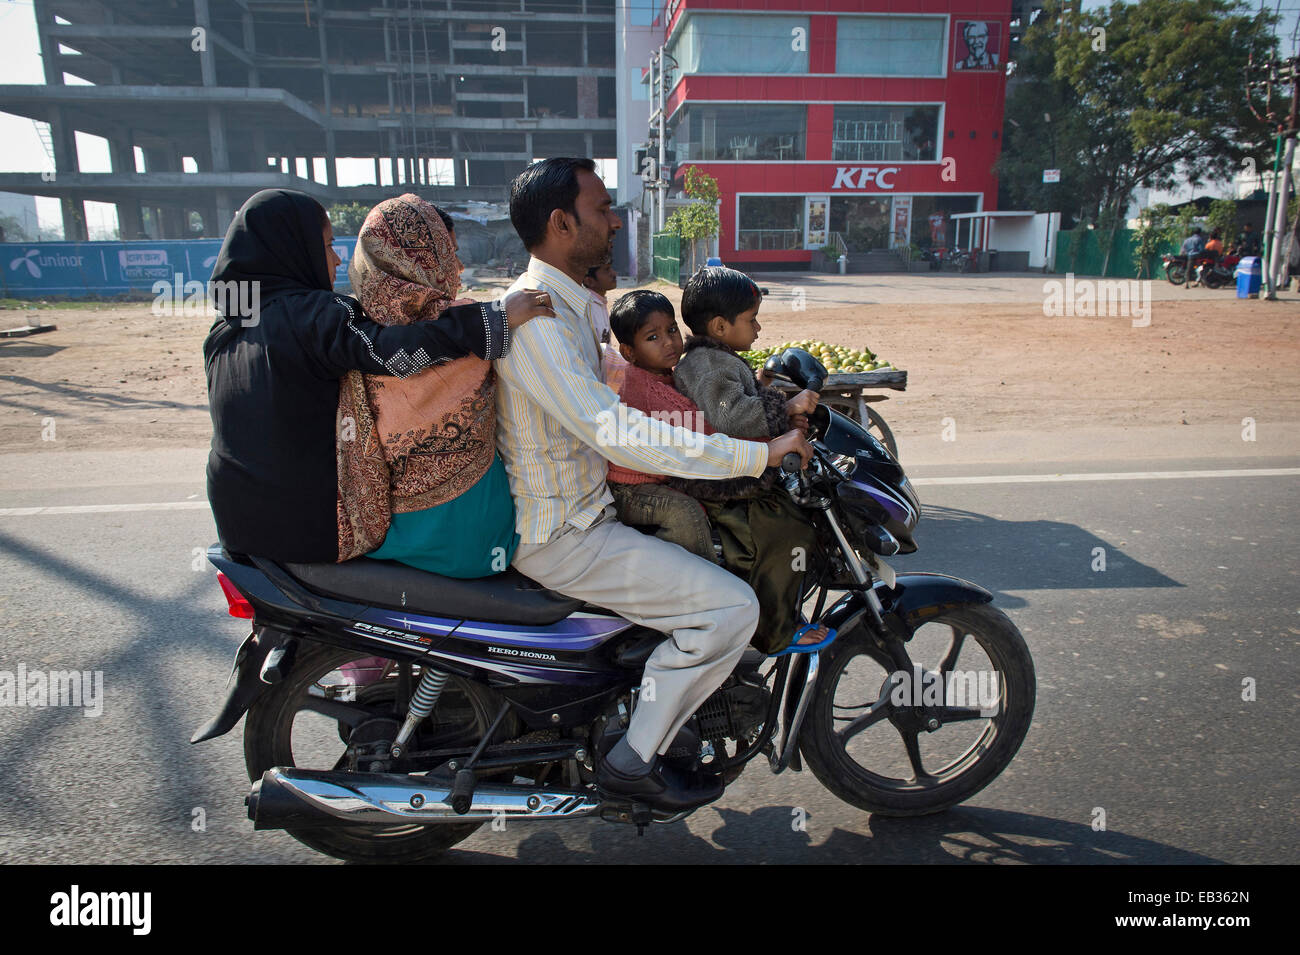 Two women, one man and two children riding together on a motorcycle, Agra, Uttar Pradesh, India Stock Photo